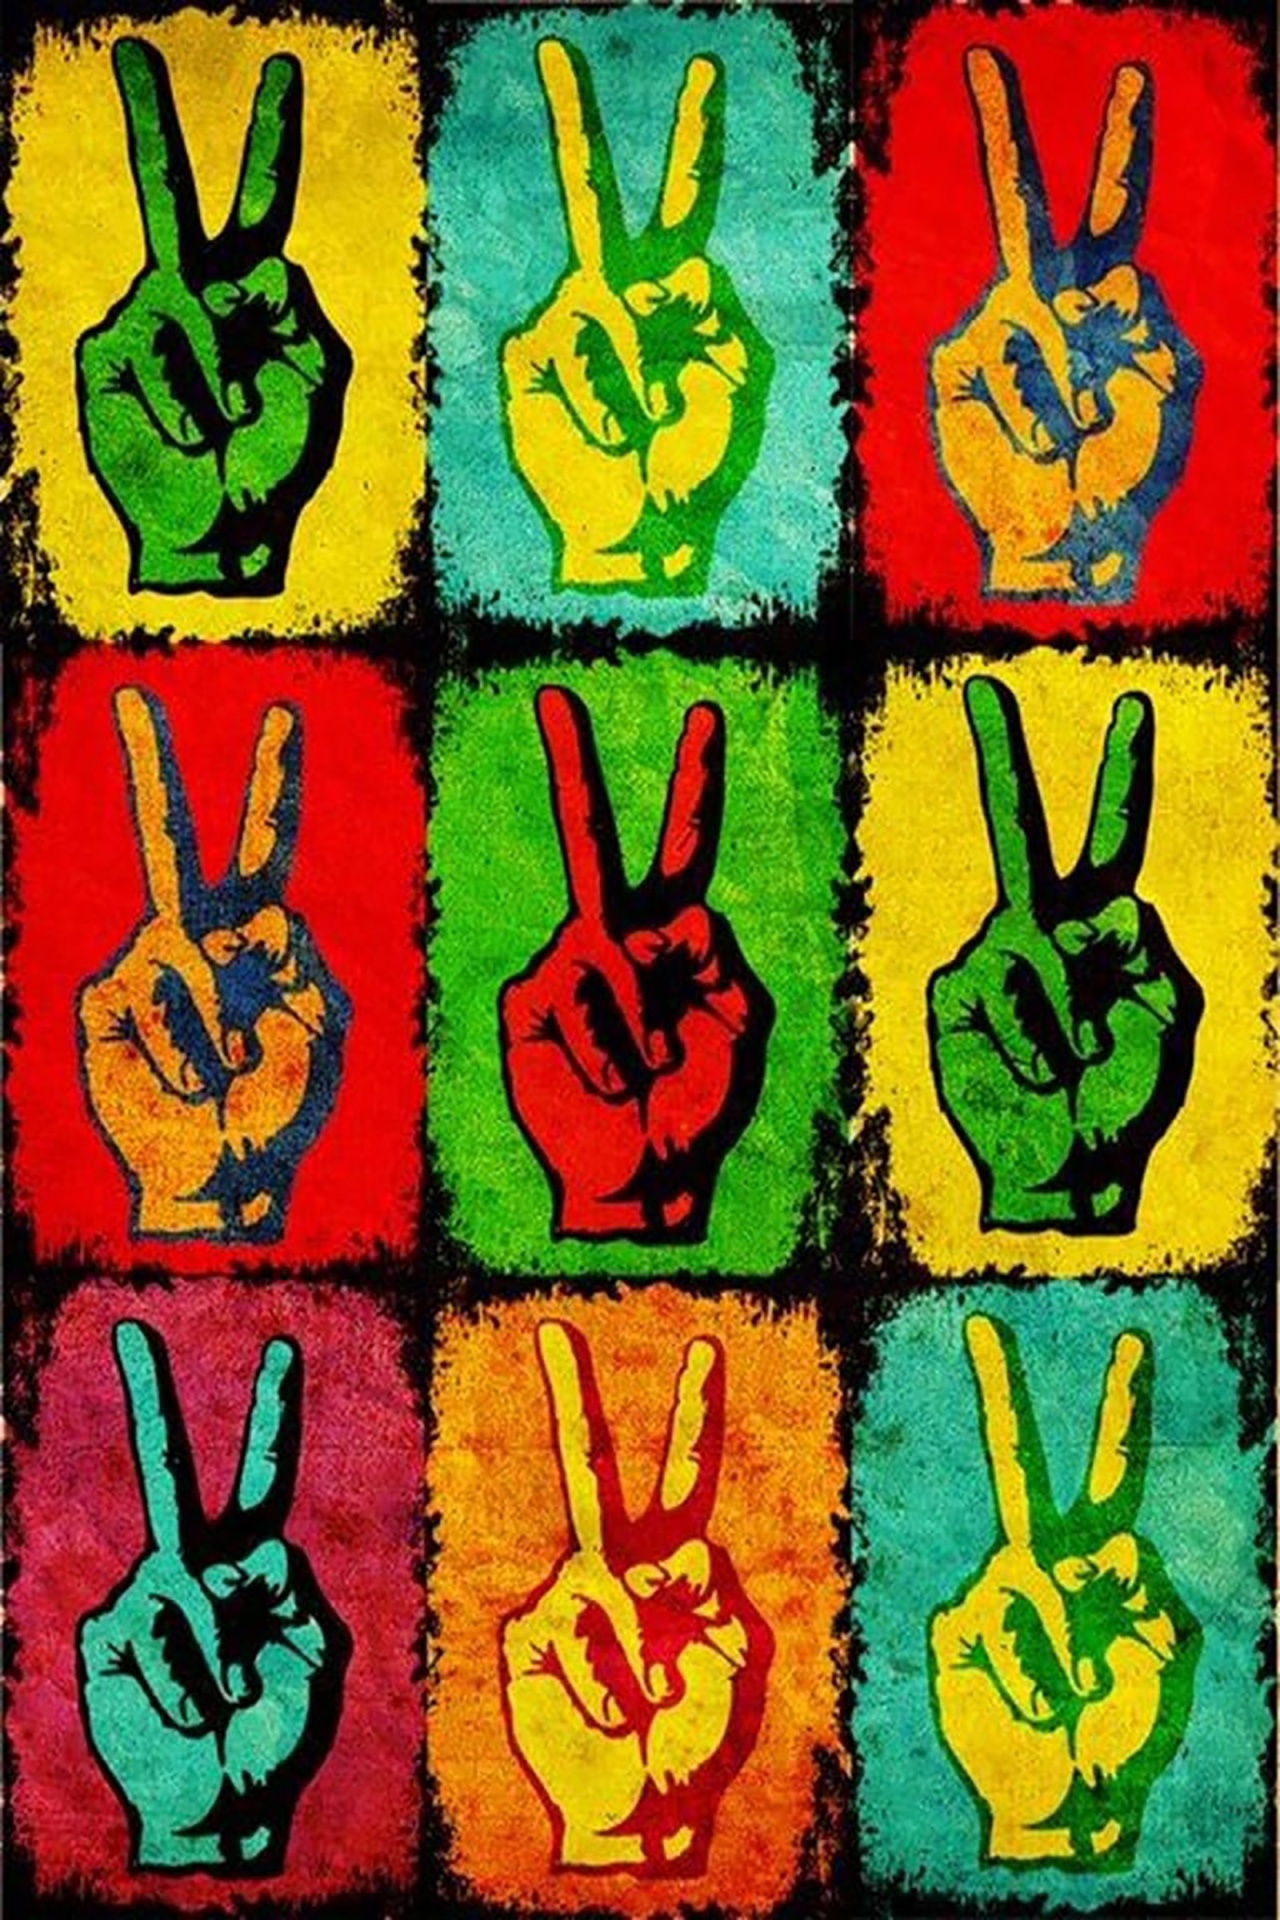 colorful grunge grid of of two fingered peace sign hands